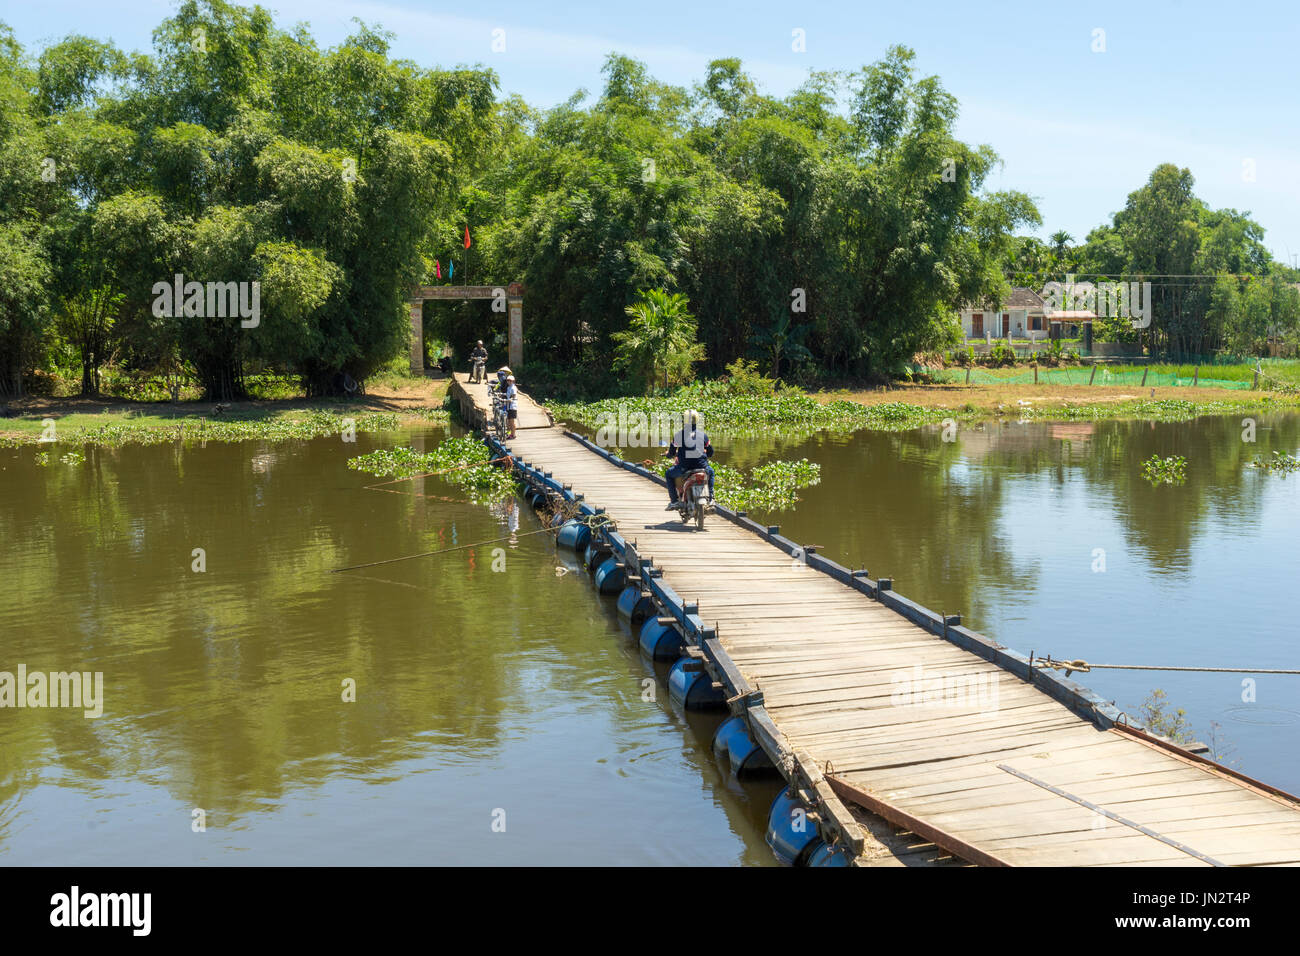 Moped riding across rustic floating bridge over Thu Bon River in rural Vietnam outside Hoi An Stock Photo